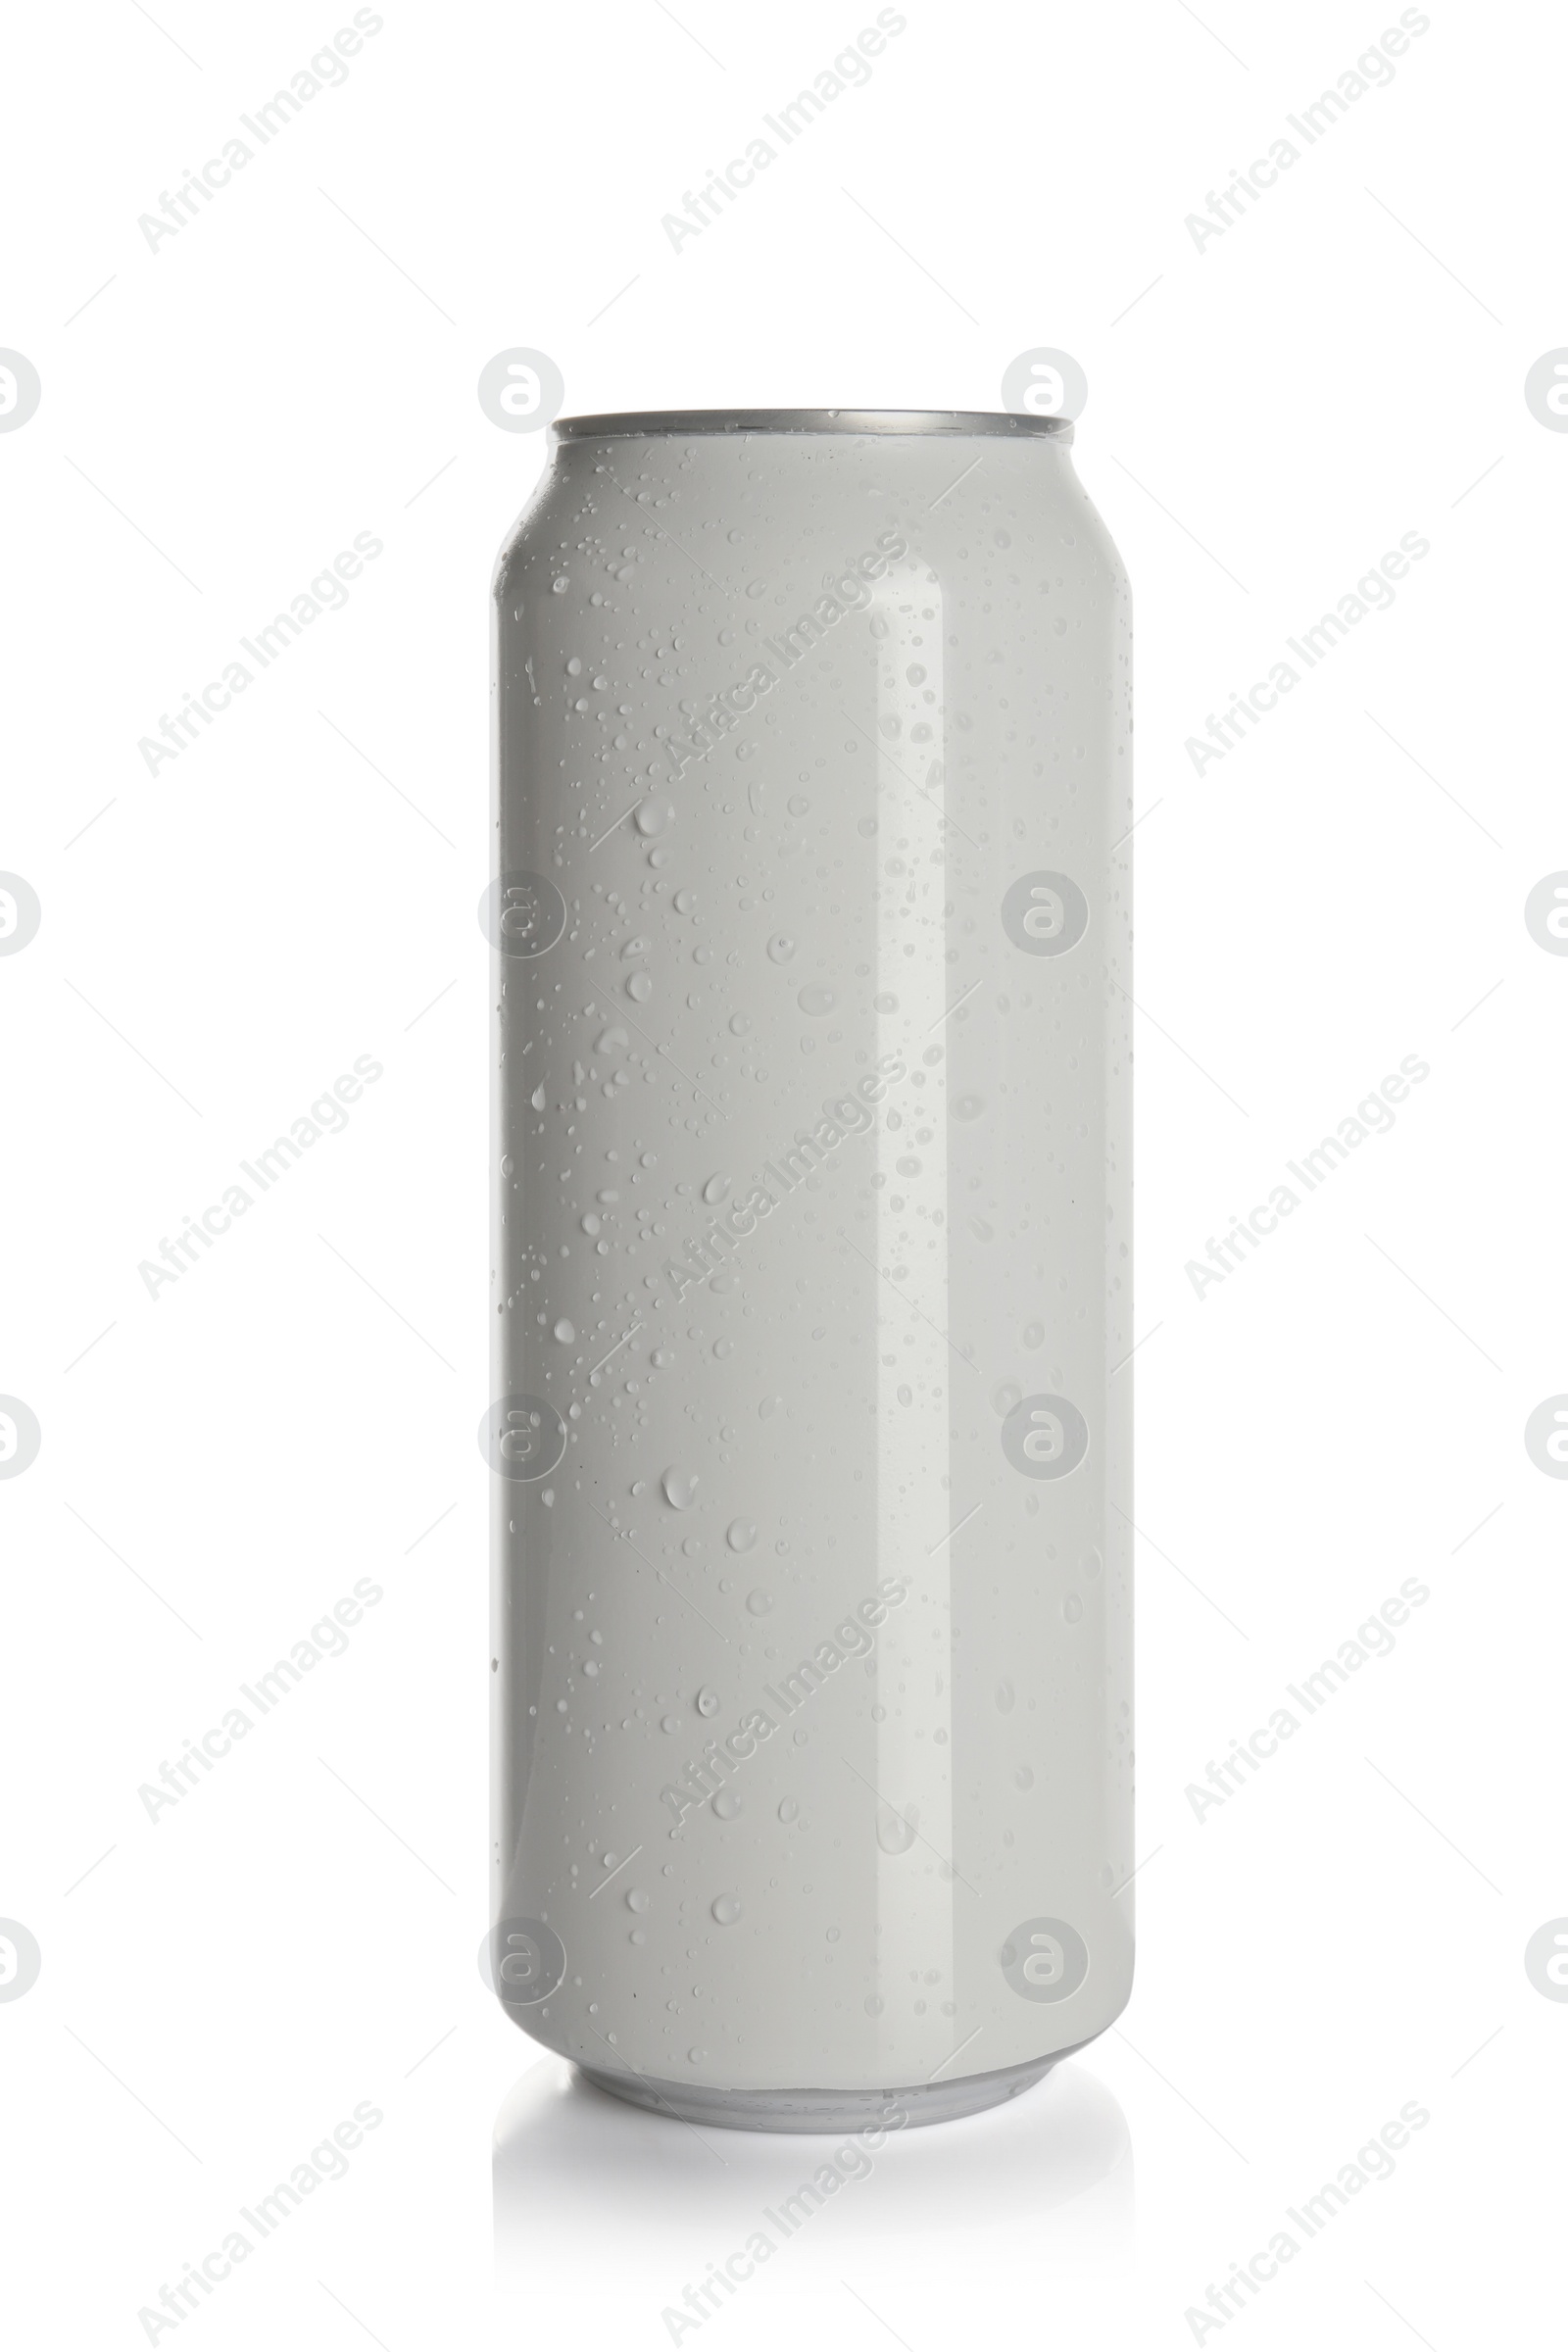 Photo of Aluminum can with drink isolated on white